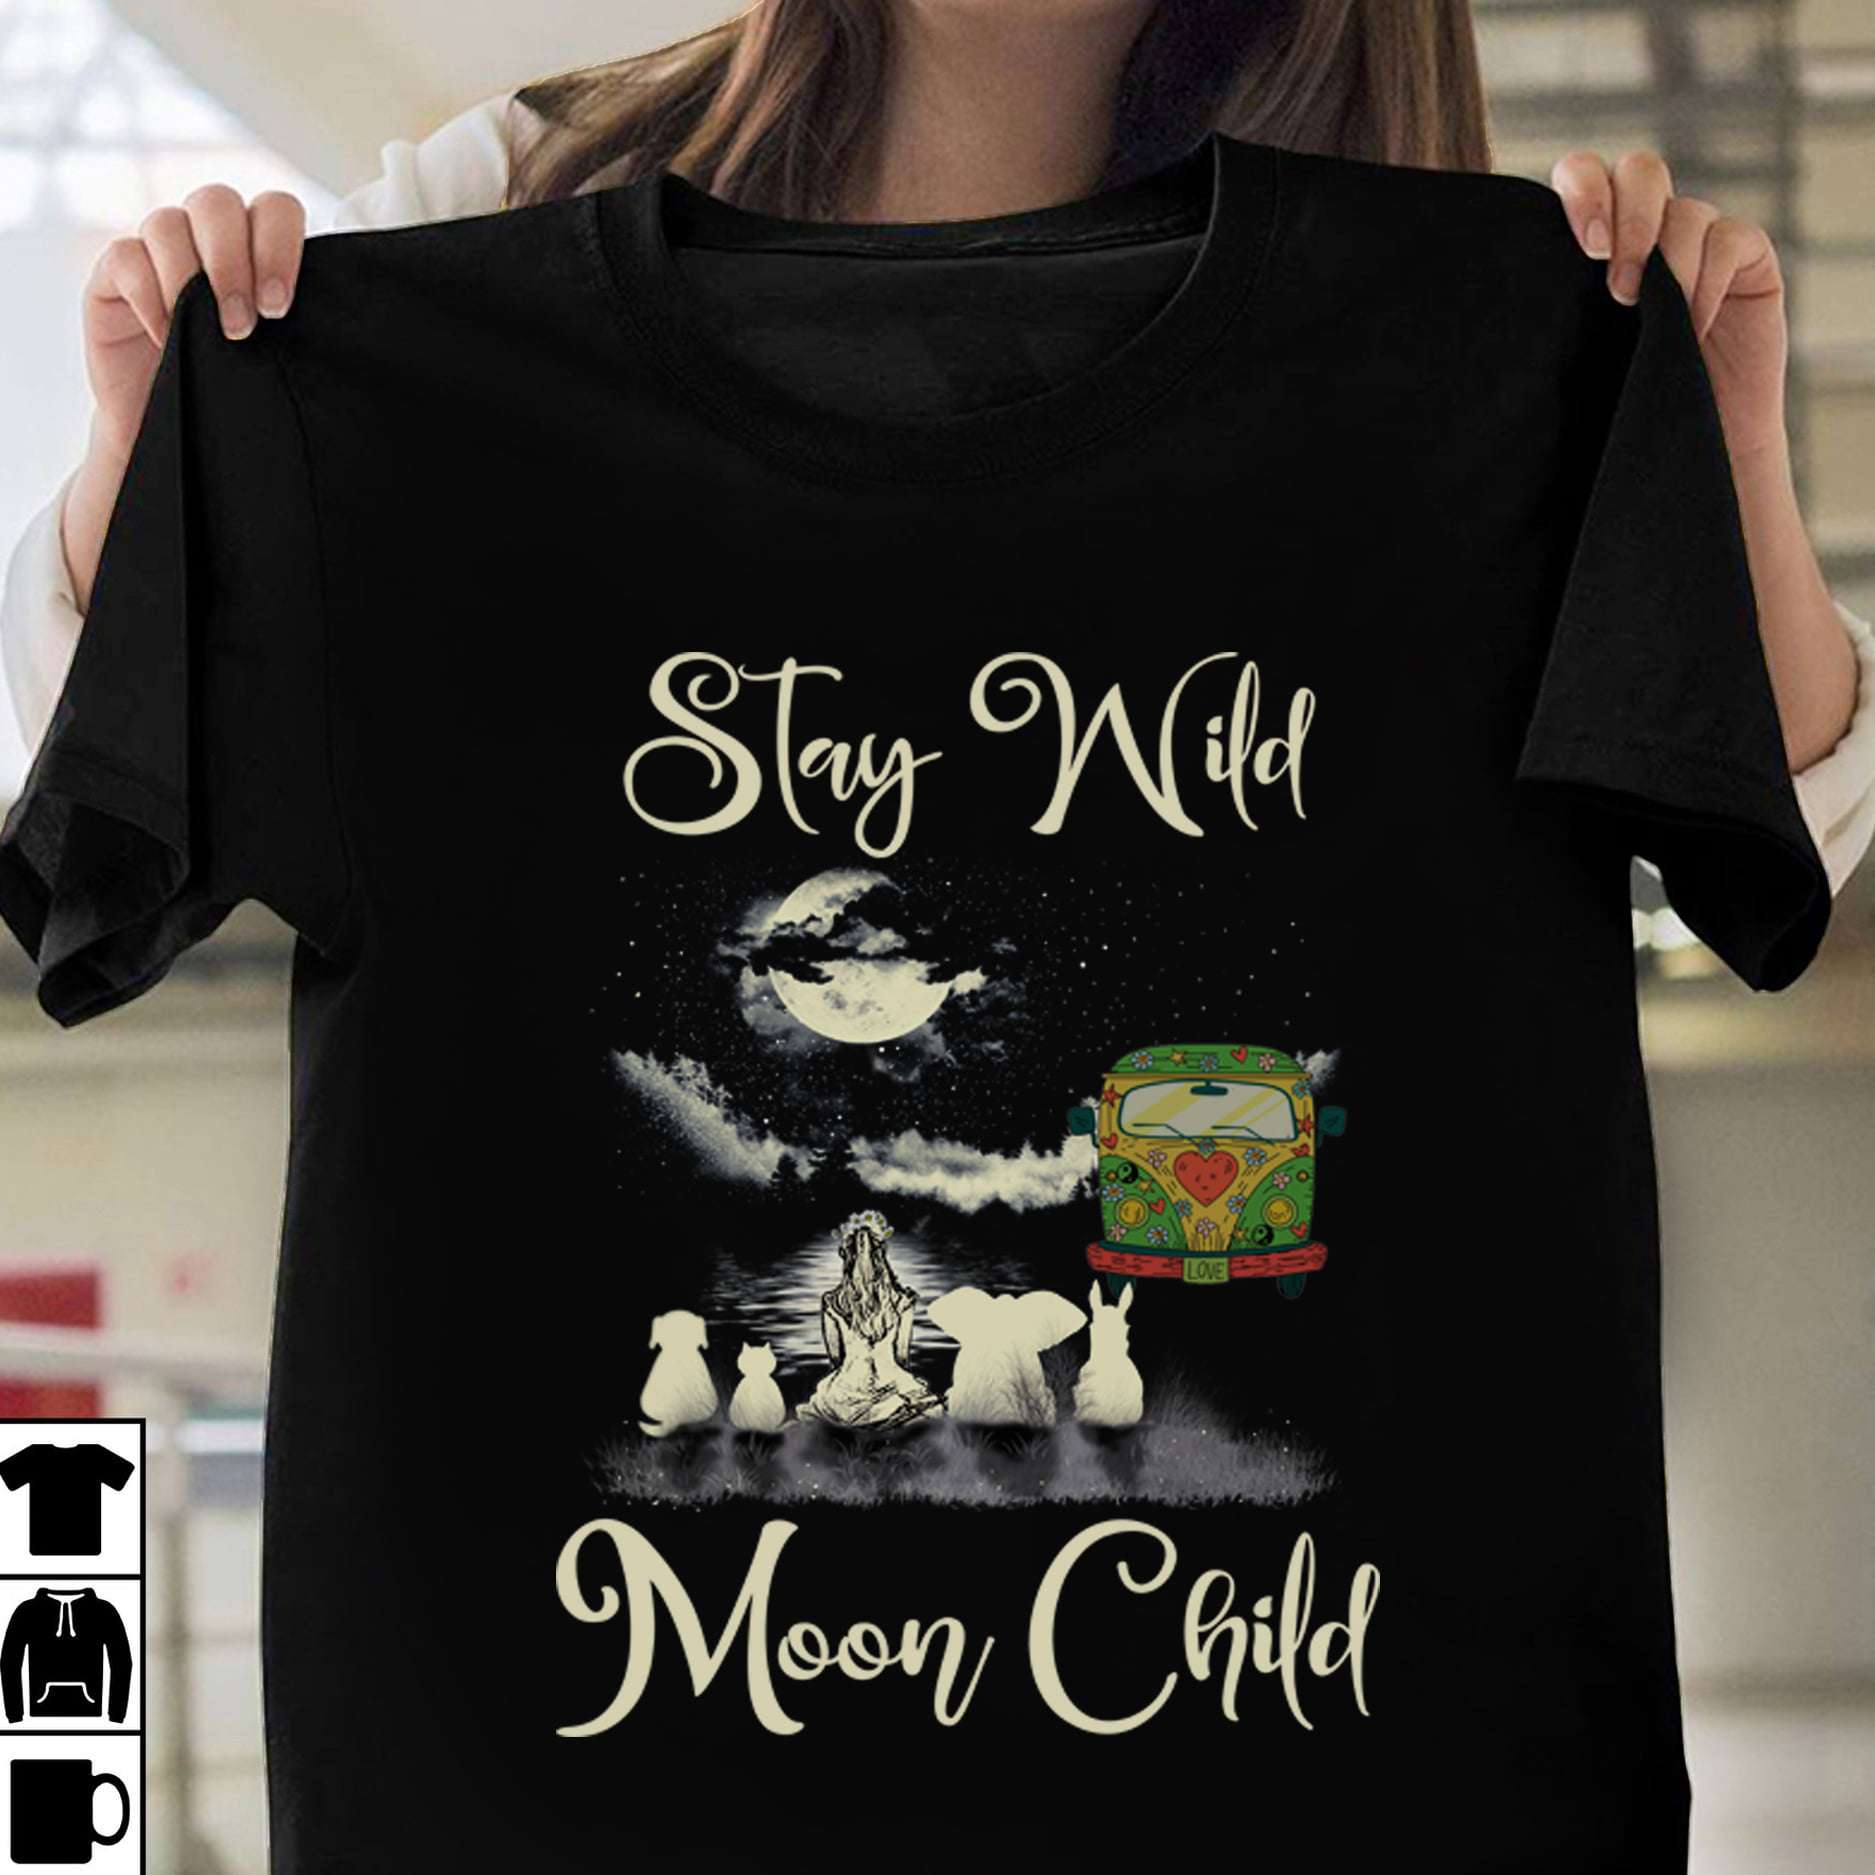 Stay wild moon child - Hippie lifestyle, watching the moon with animals